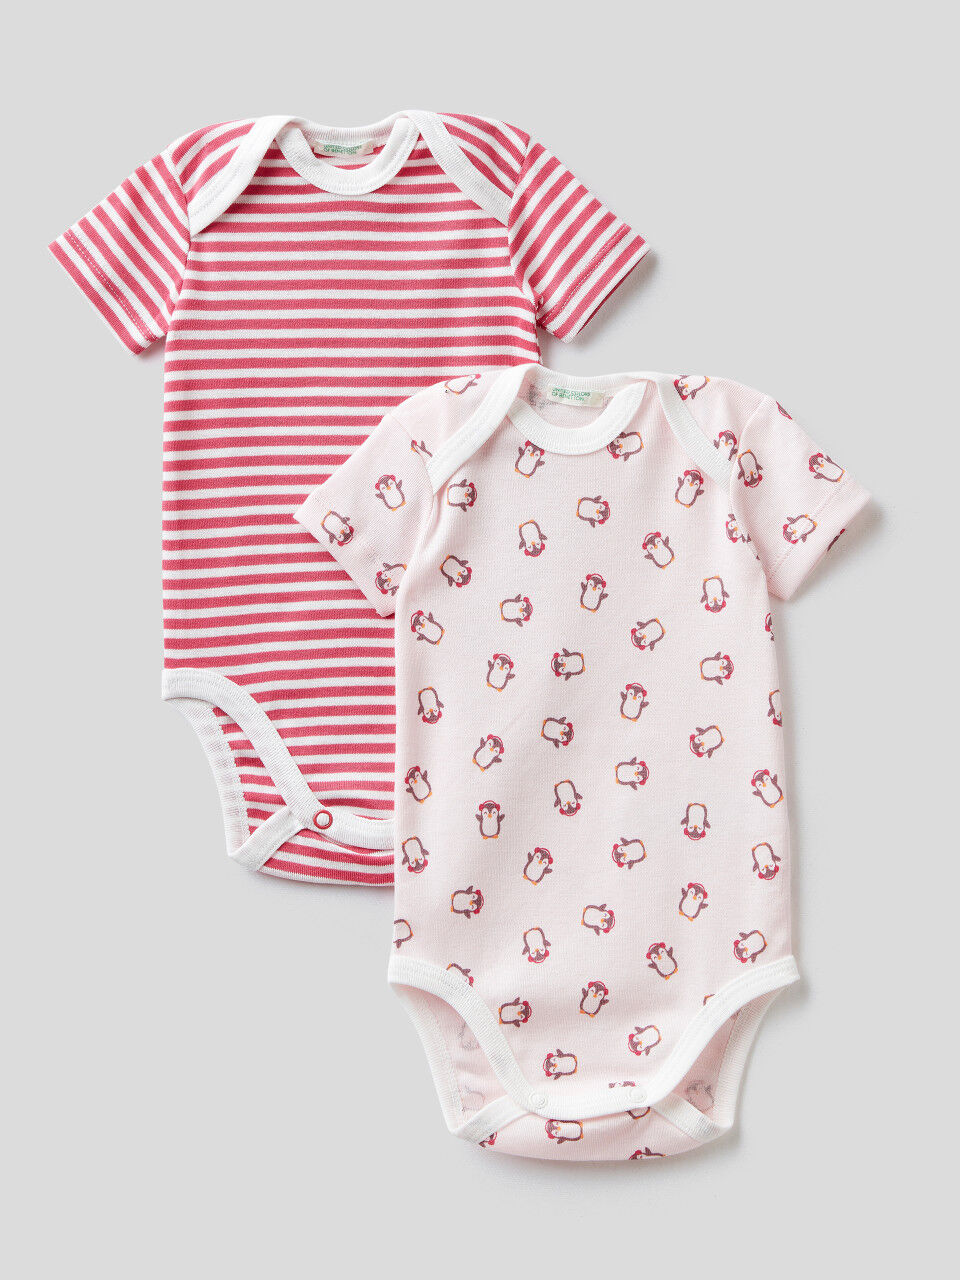 Two short sleeve bodysuits in 100% cotton